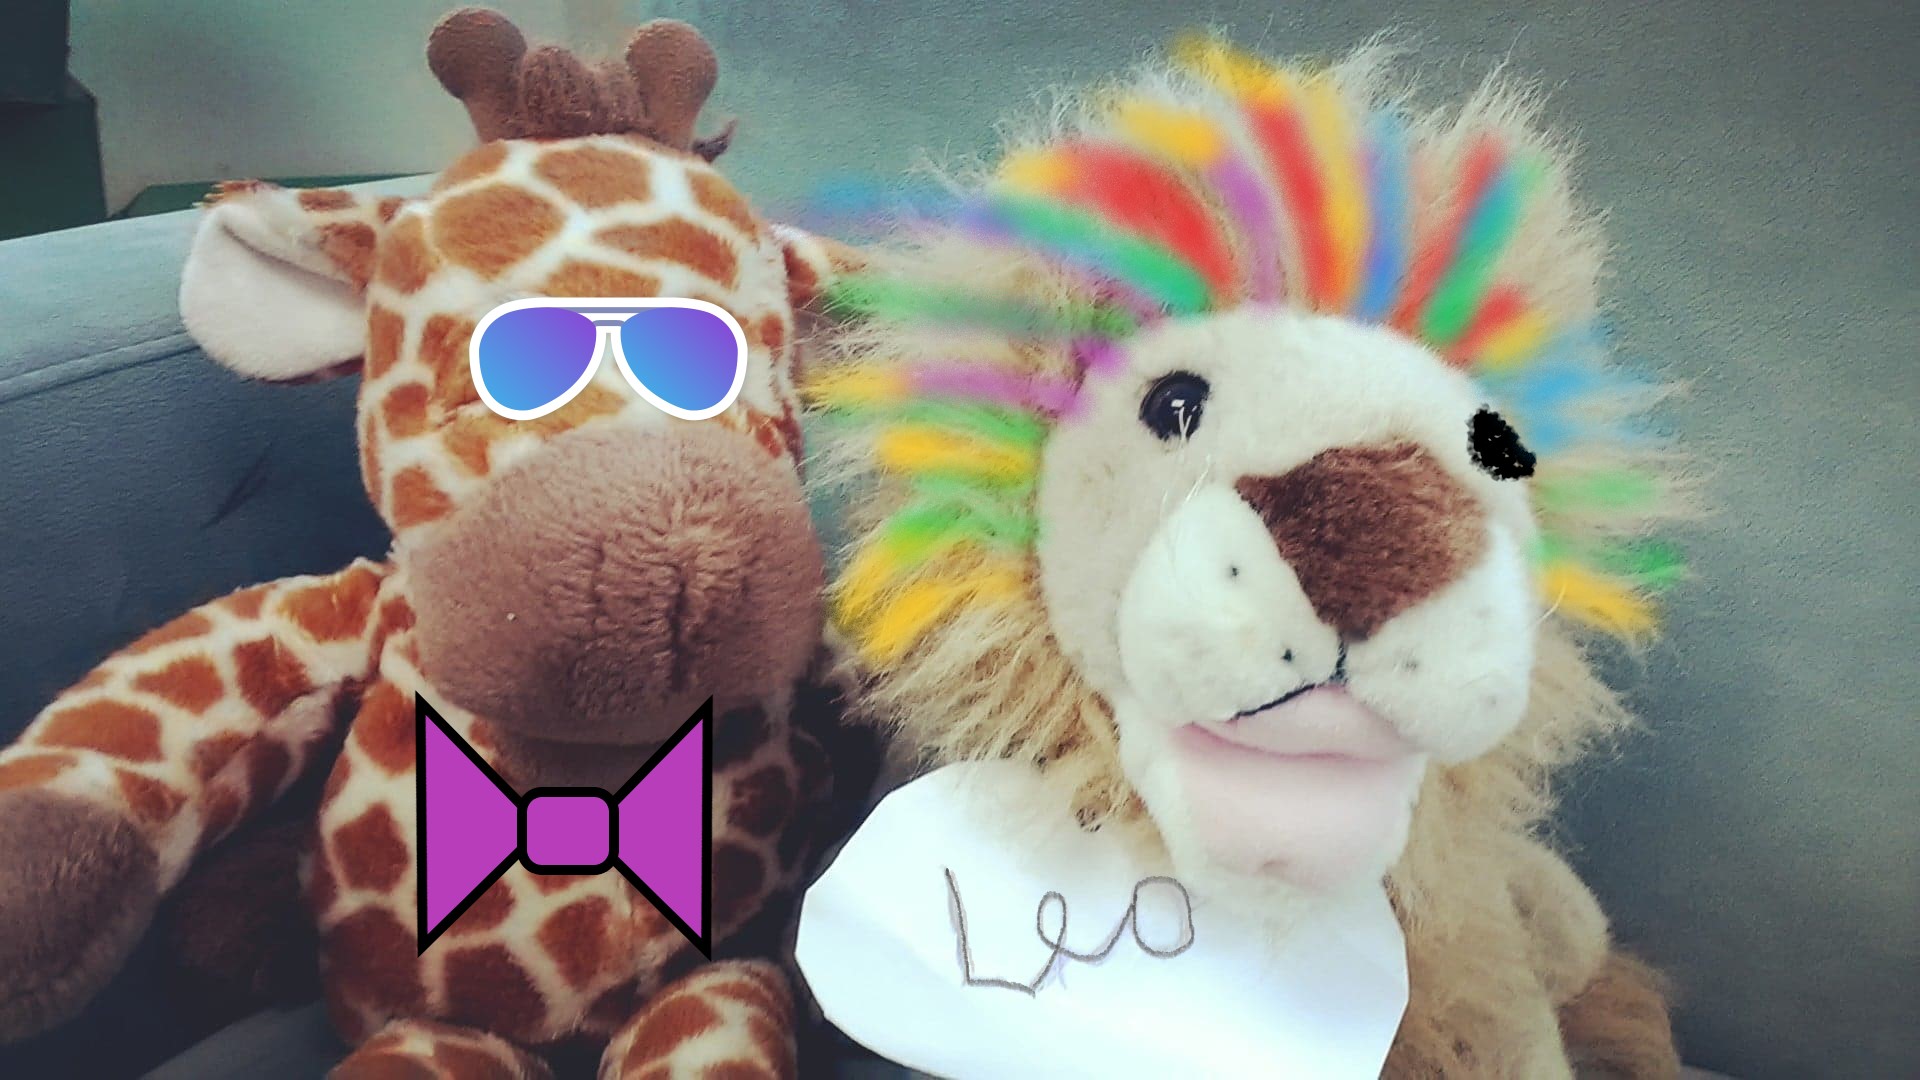 Giraffe and lion stuffed animals in silly costumes.